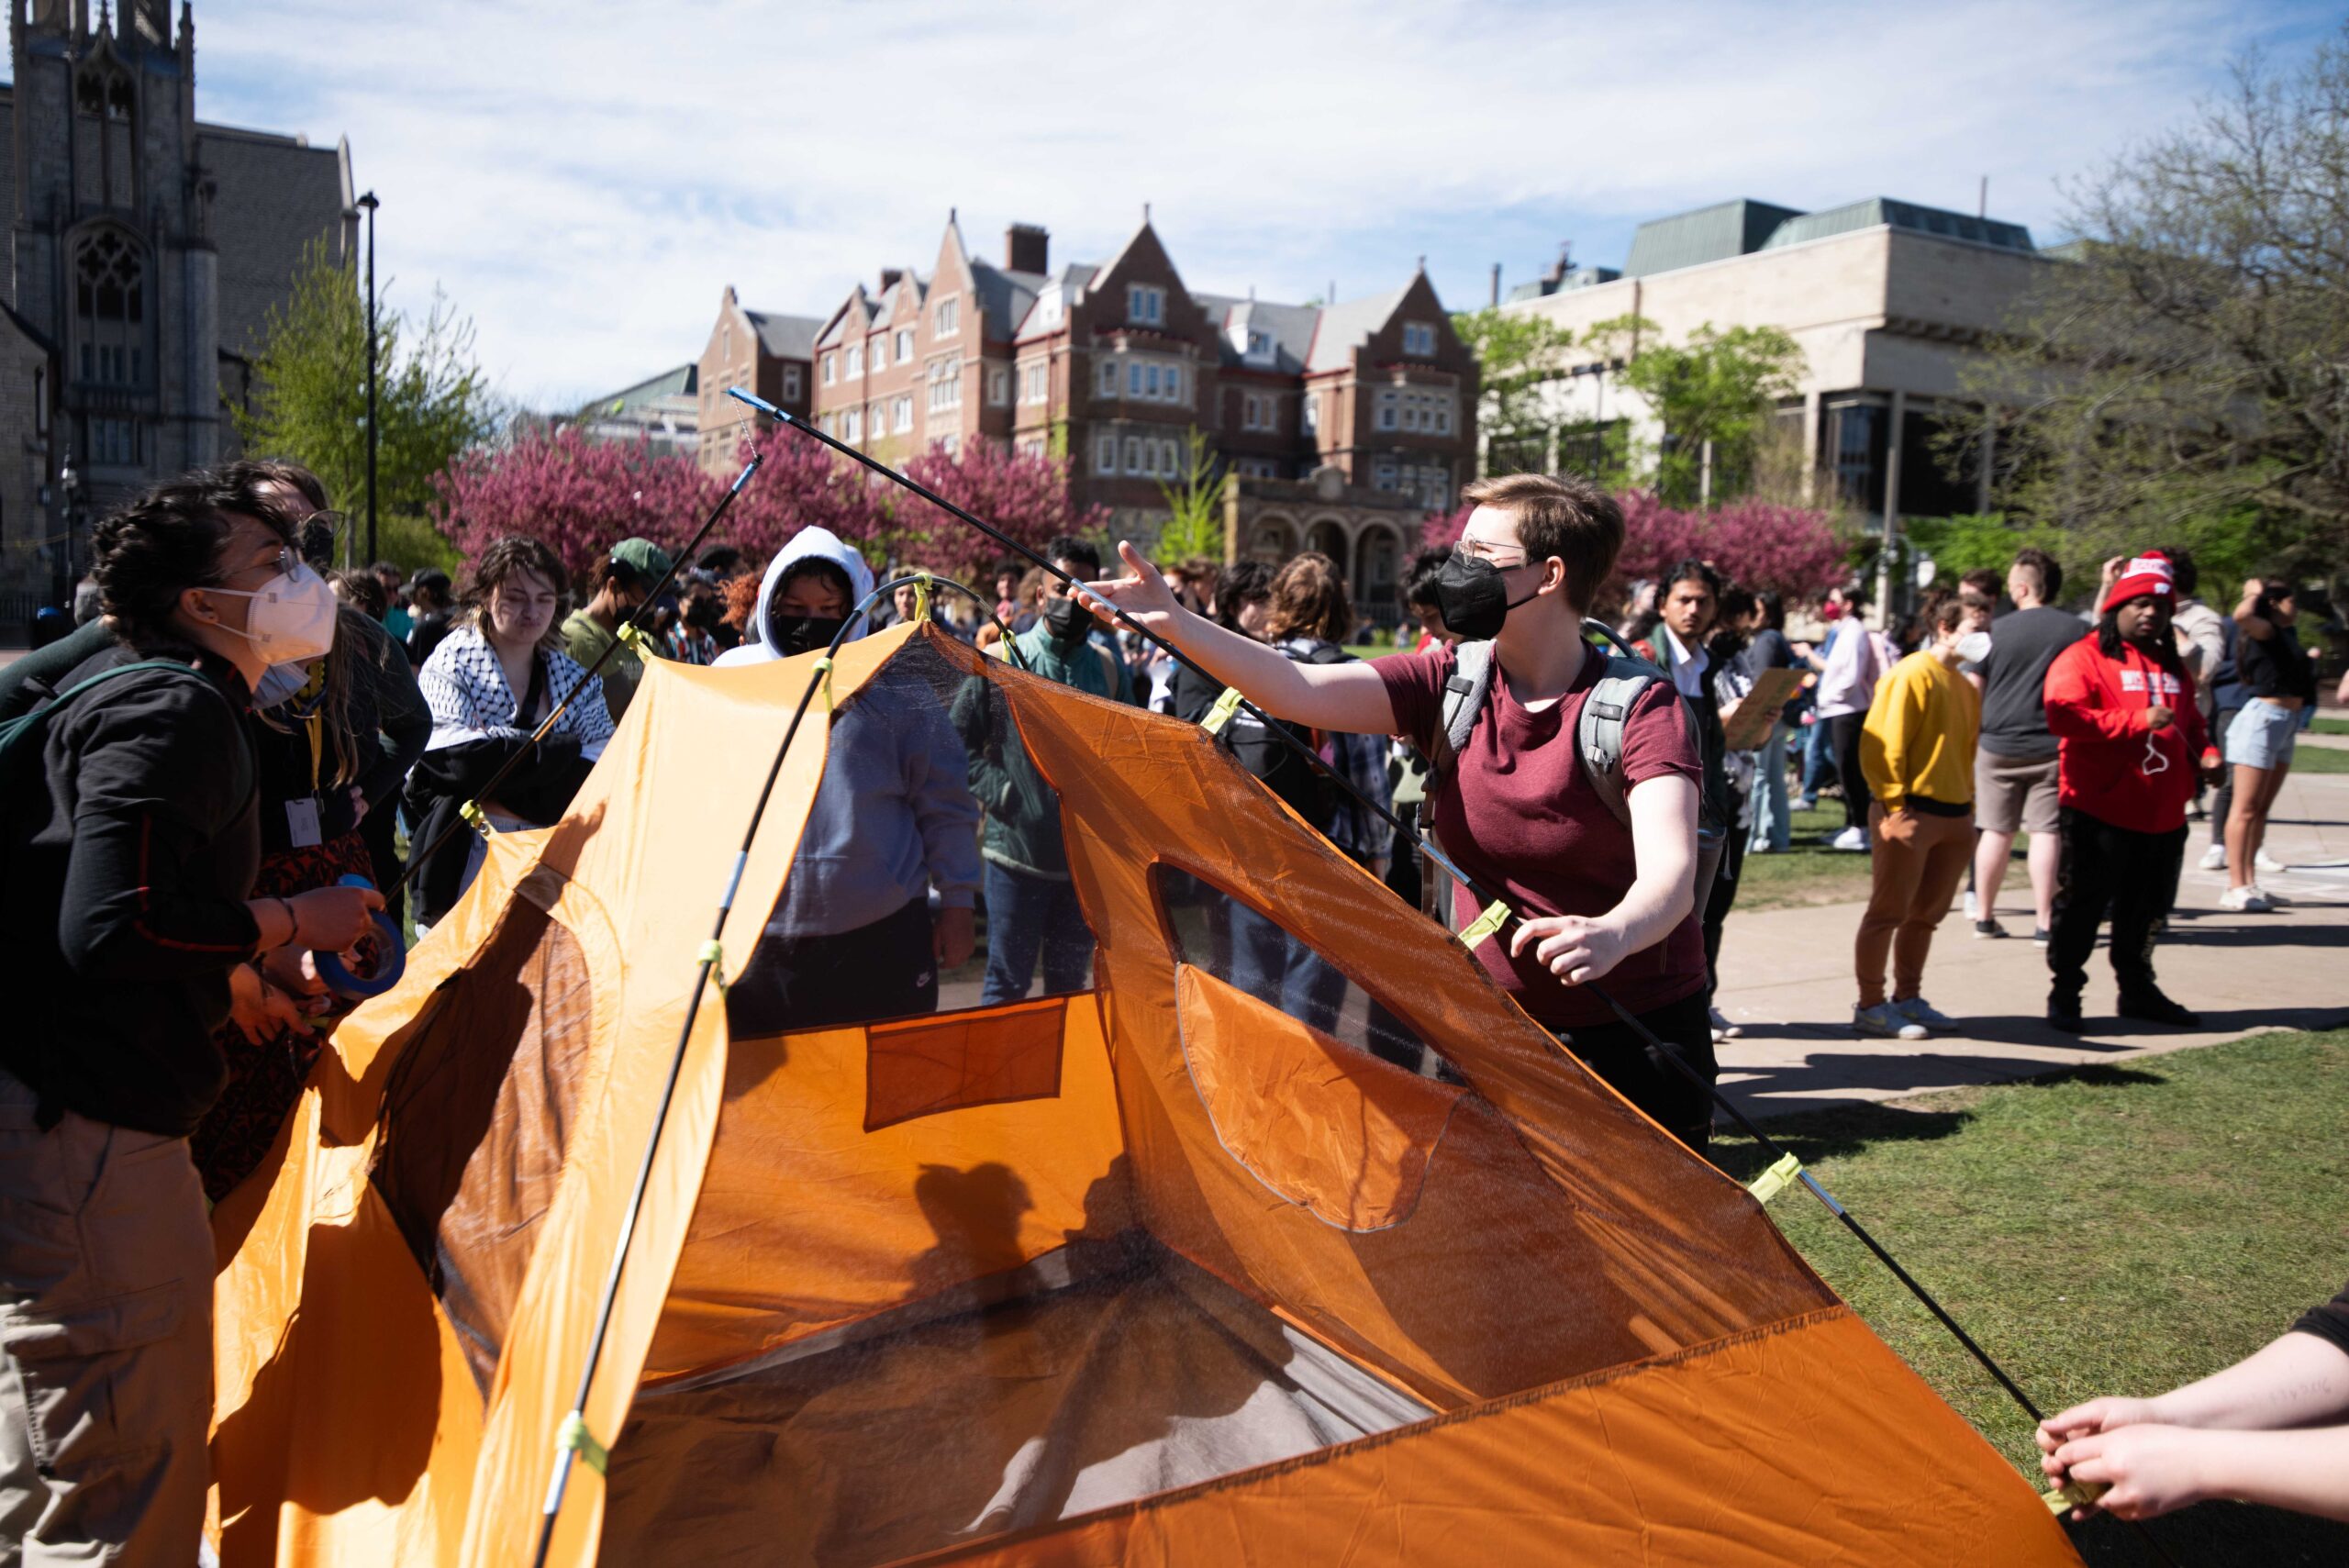 Protesters move tents to be closer to remaining supplies at UW-Madison.